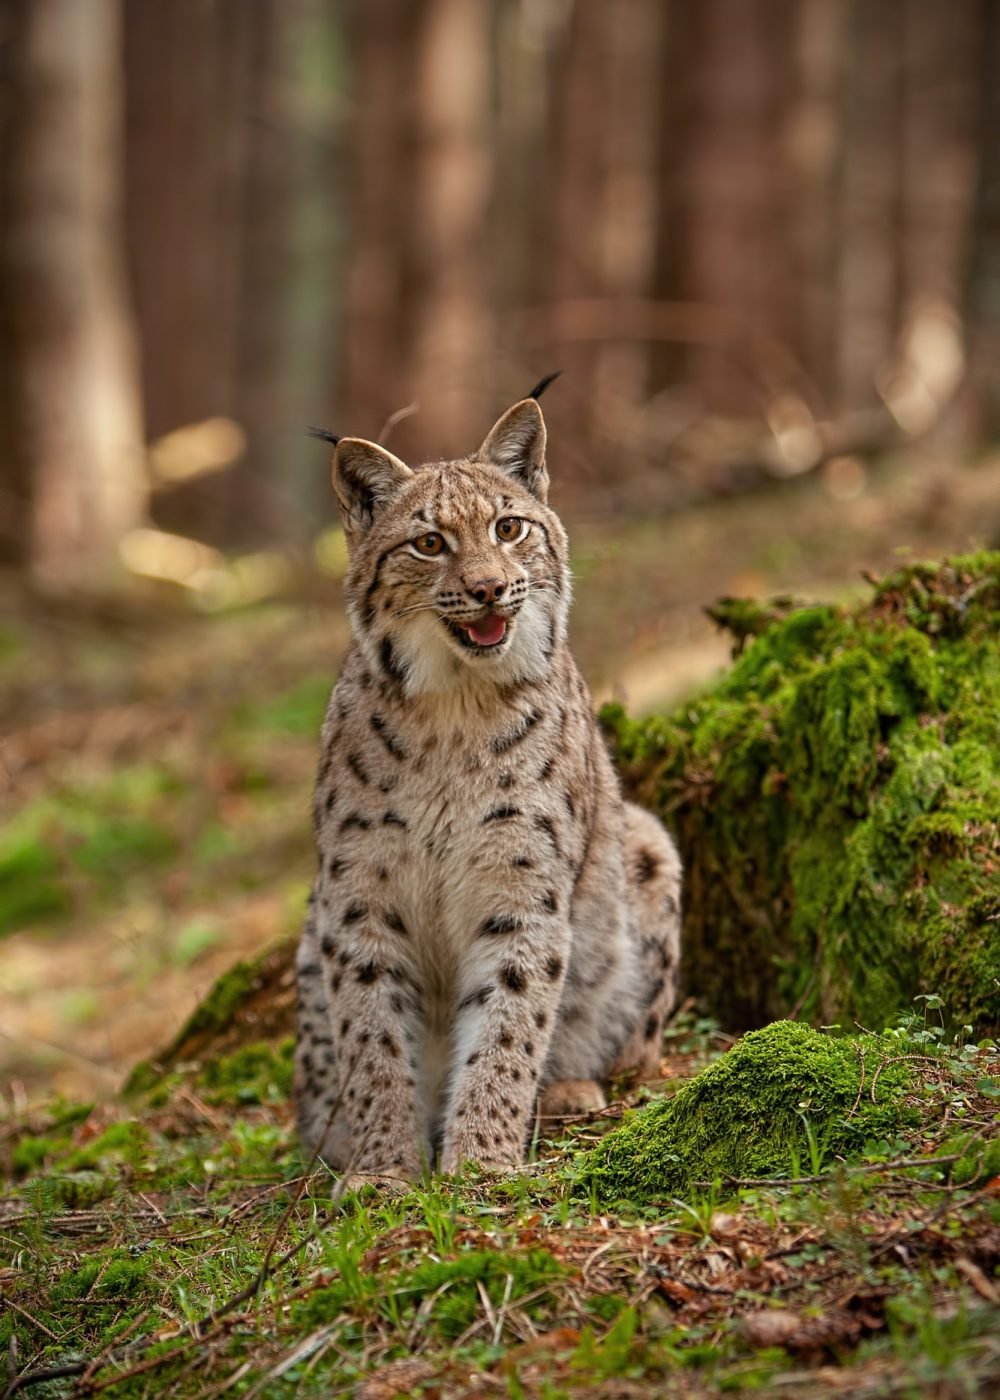 eursian-lynx-sitting-on-rocks-covered-with-green-moss-with-blurred-background.jpg